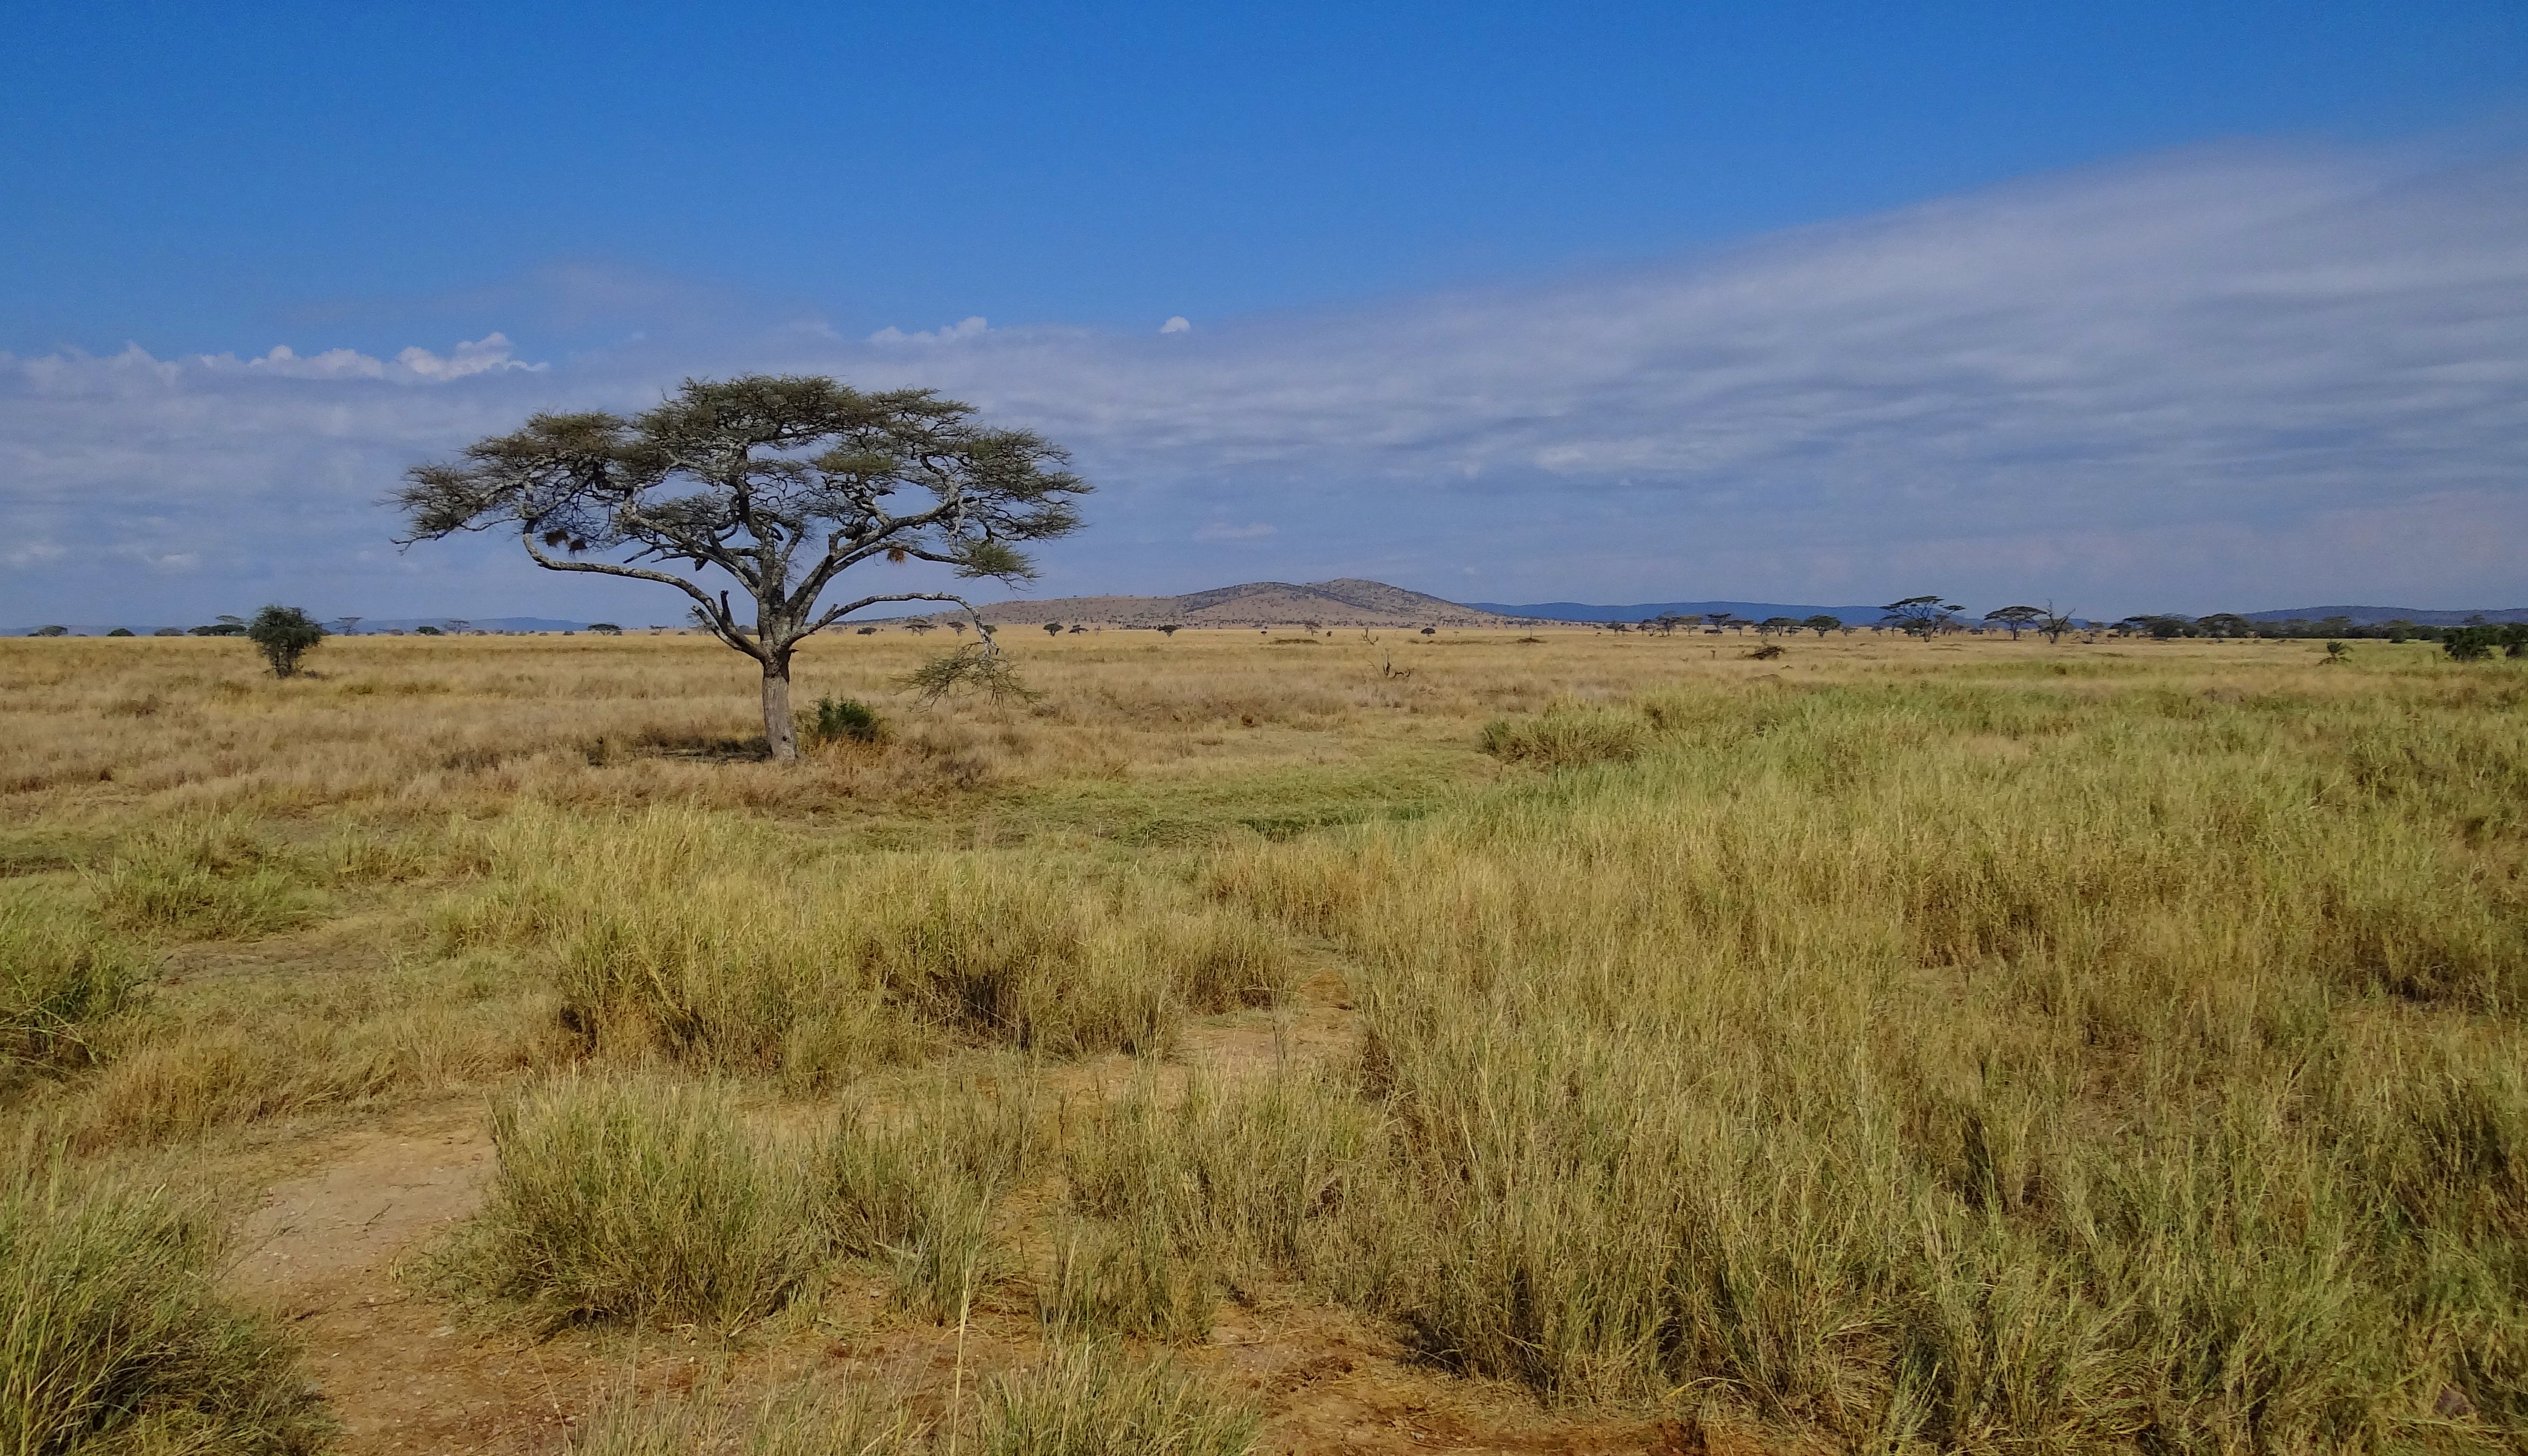 Unforgettable Experiences: Immerse Yourself in the Local Culture and Rich History of the Serengeti